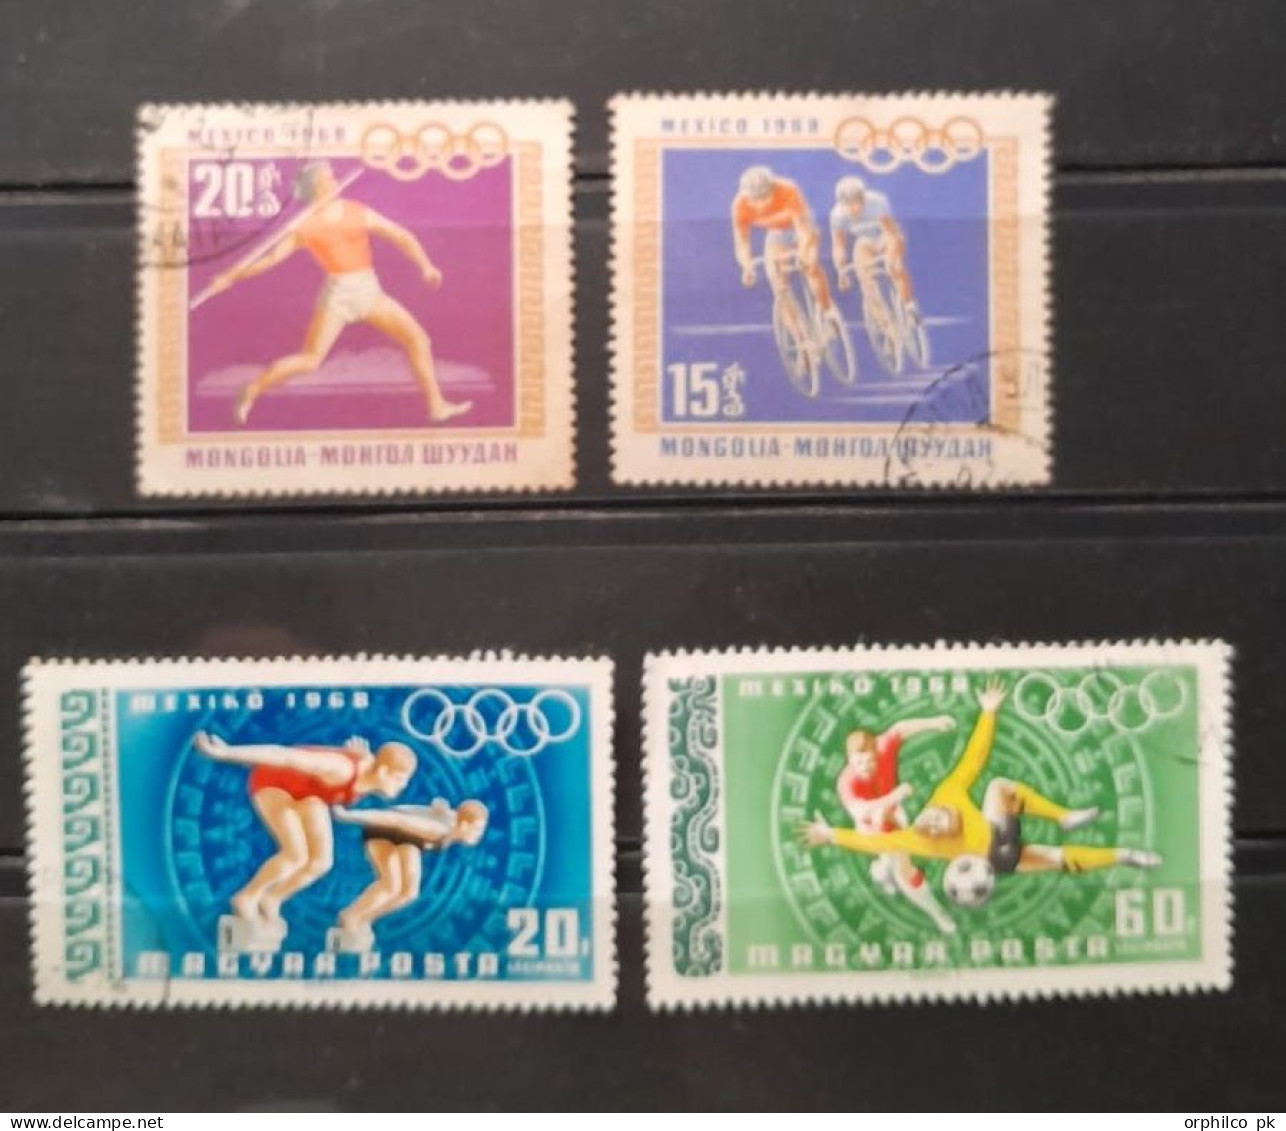 MEXICO CITY Olympic 1968 USED Javelin Cycling Swiming Football Coccer Mongolia Hungery Gold Medal - Ete 1968: Mexico